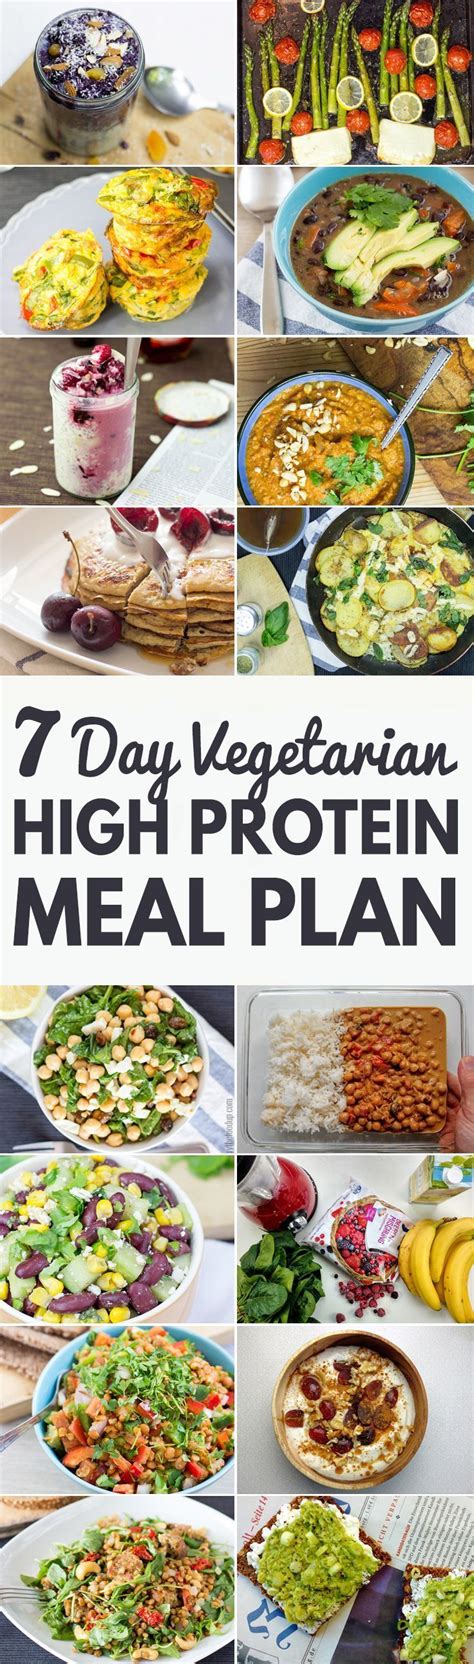 high protein vegetarian meal plan build muscle  tone